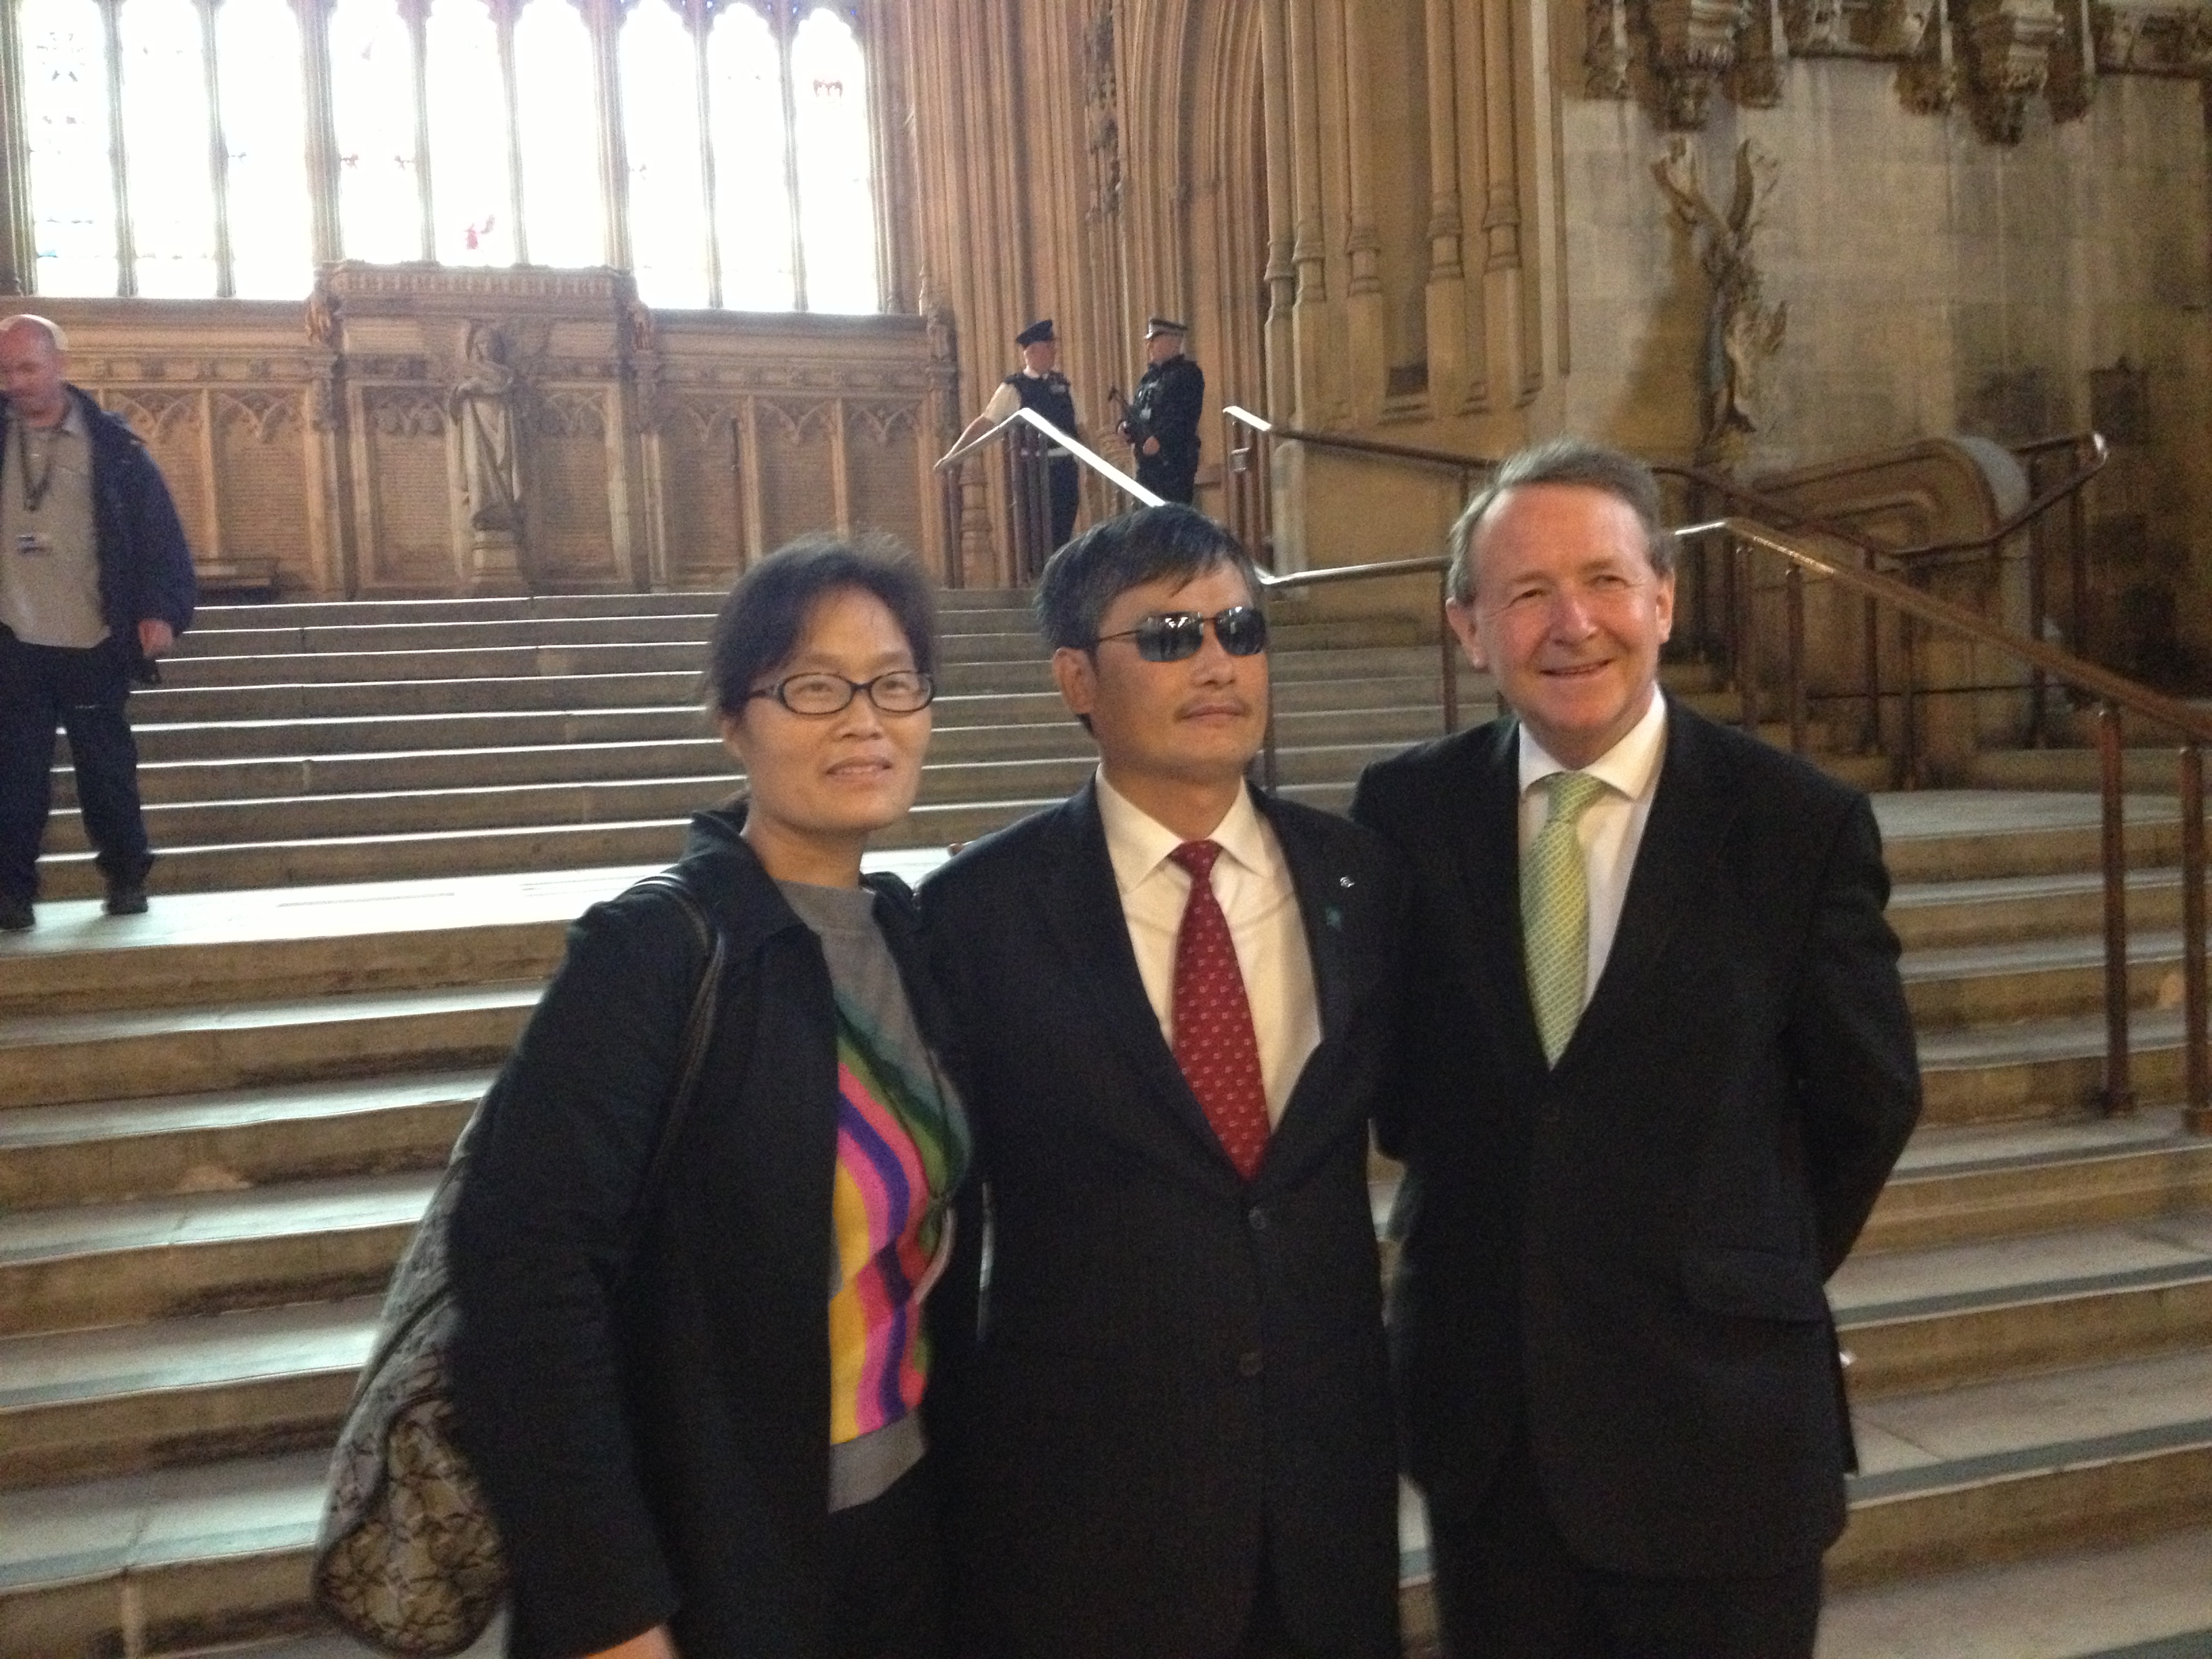 Cheng Guangcheng and his wife in Parliament's Westminster Hall